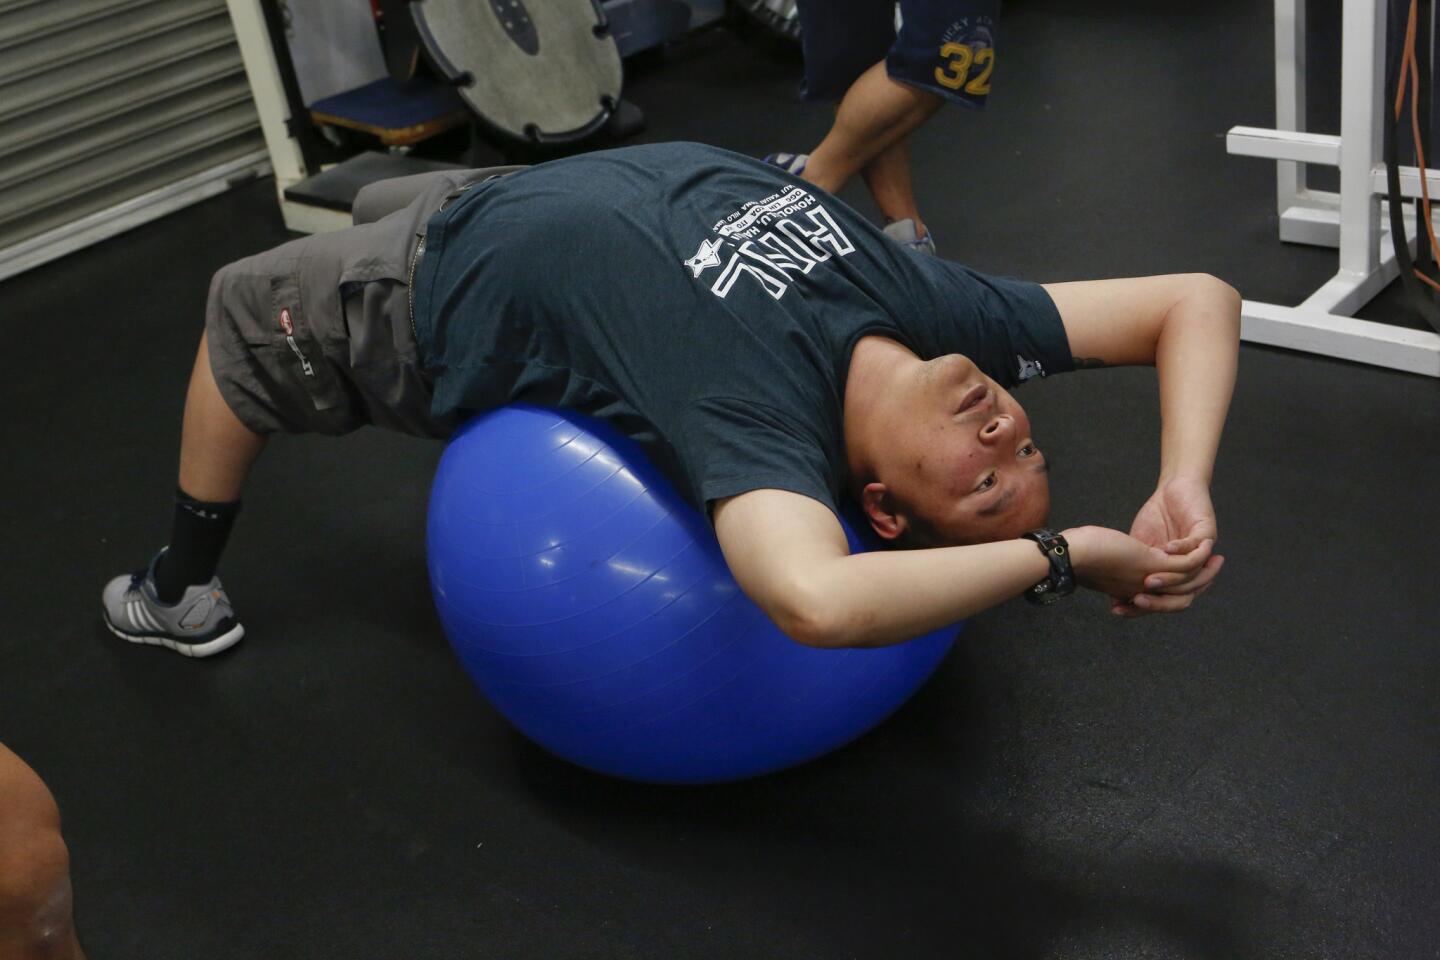 Culver City police officer Tri Lai stretches on a ball at A Tighter U gym in Culver City. Li, a member of the Culver City police force for 15 years, was seriously injured in a 2013 motorcycle accident. After months in the hospital, he began training to return to work.